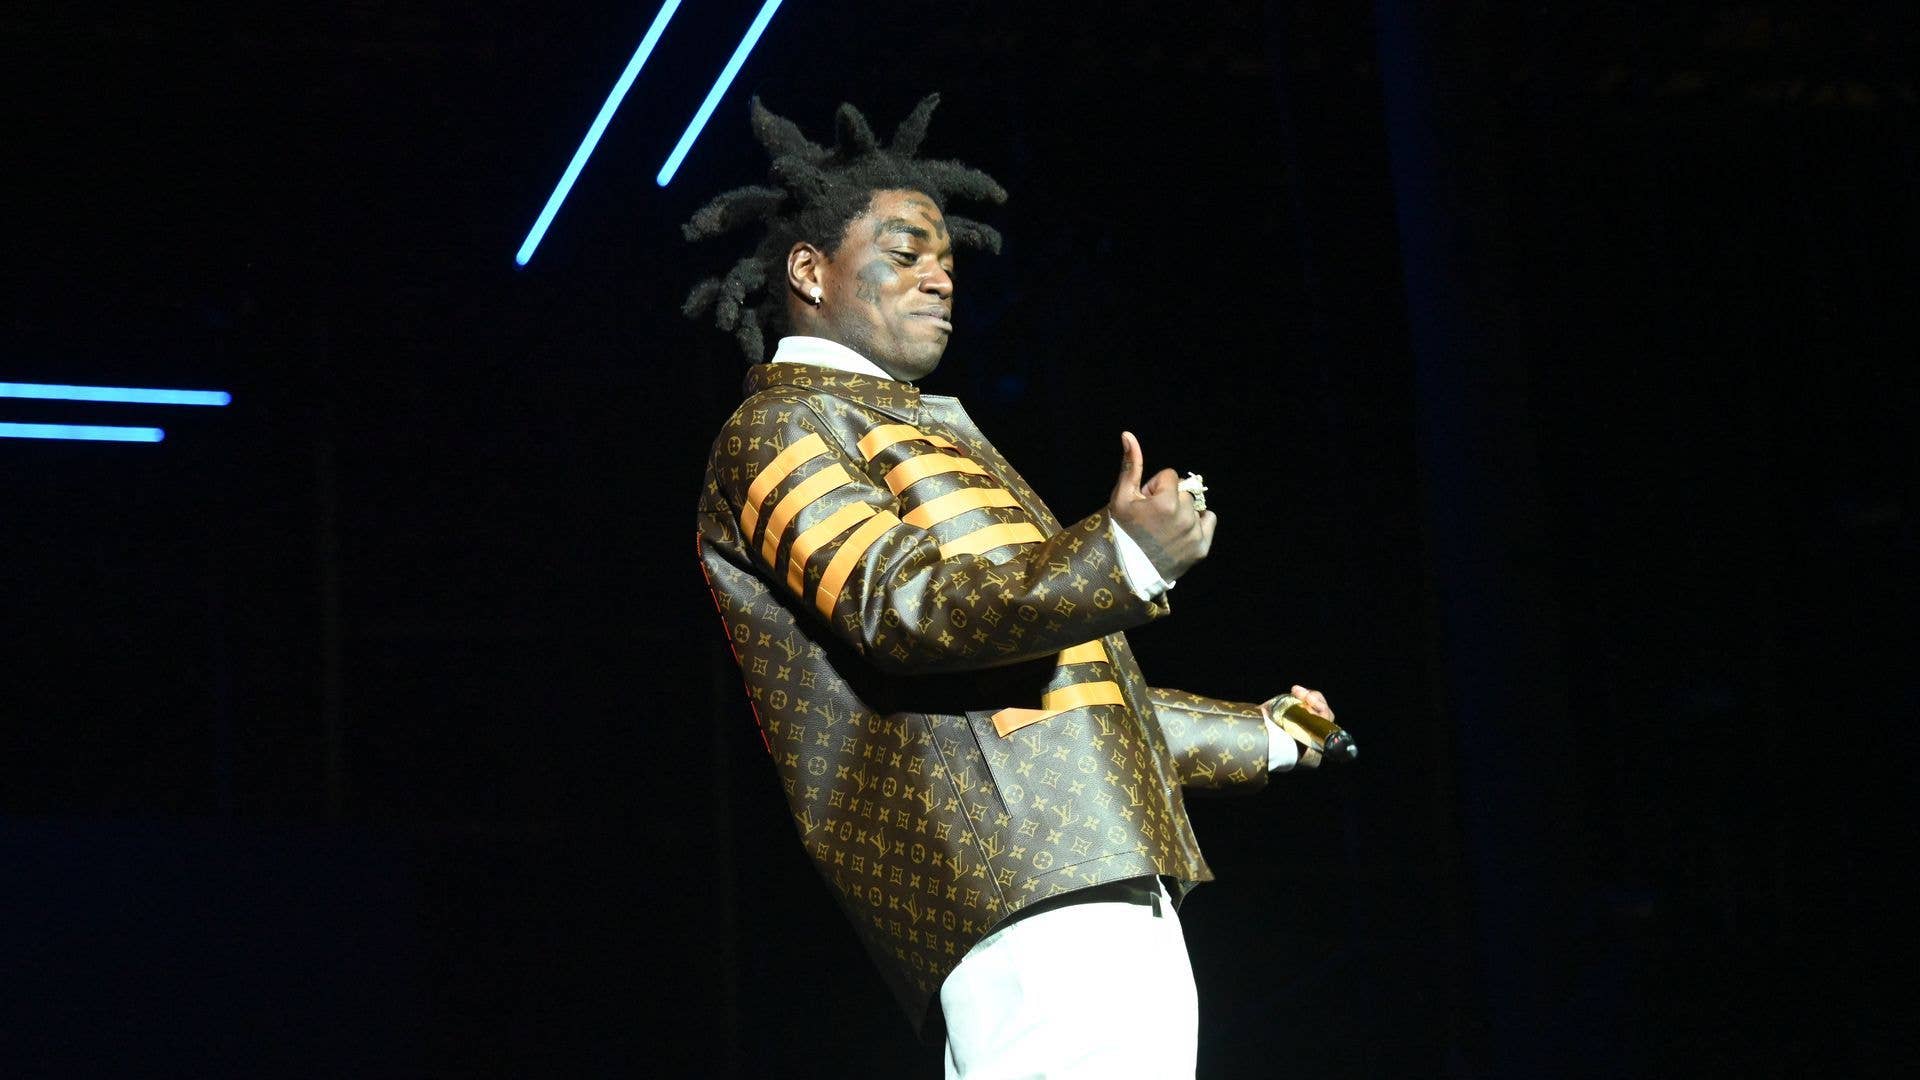 Kodak Black performs at the Rolling Loud NYC music festival in Citi Field